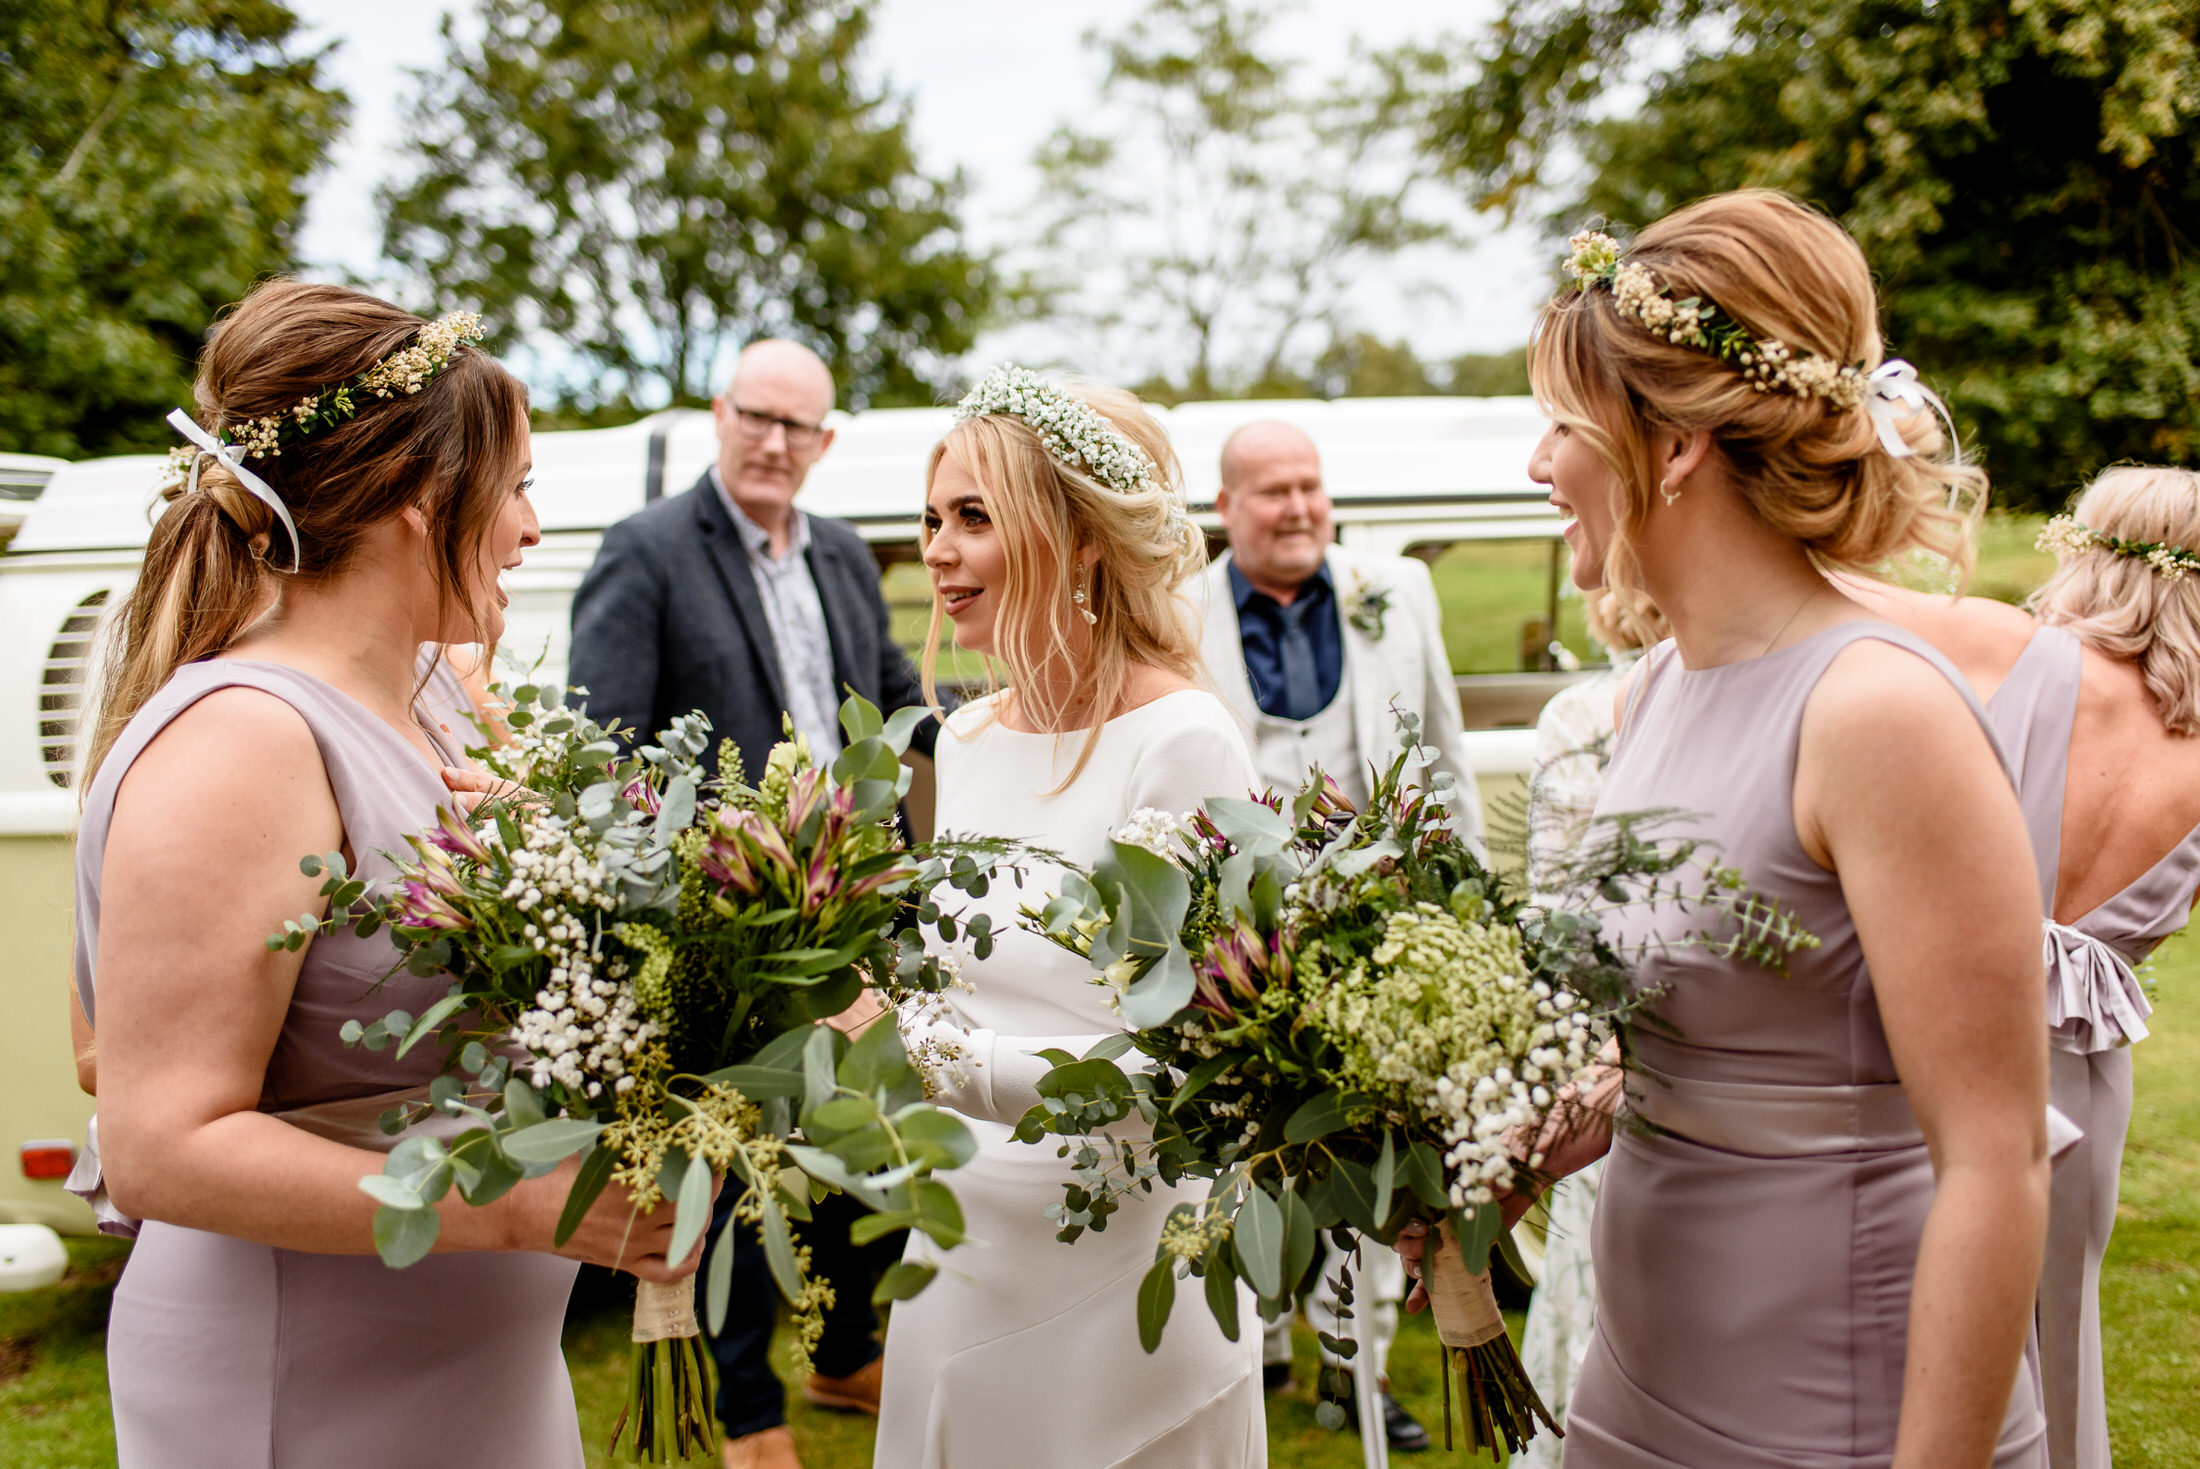 A wedding party, including the bride and her bridesmaids, standing in front of a VW van at Scrivelsby Walled Garden.